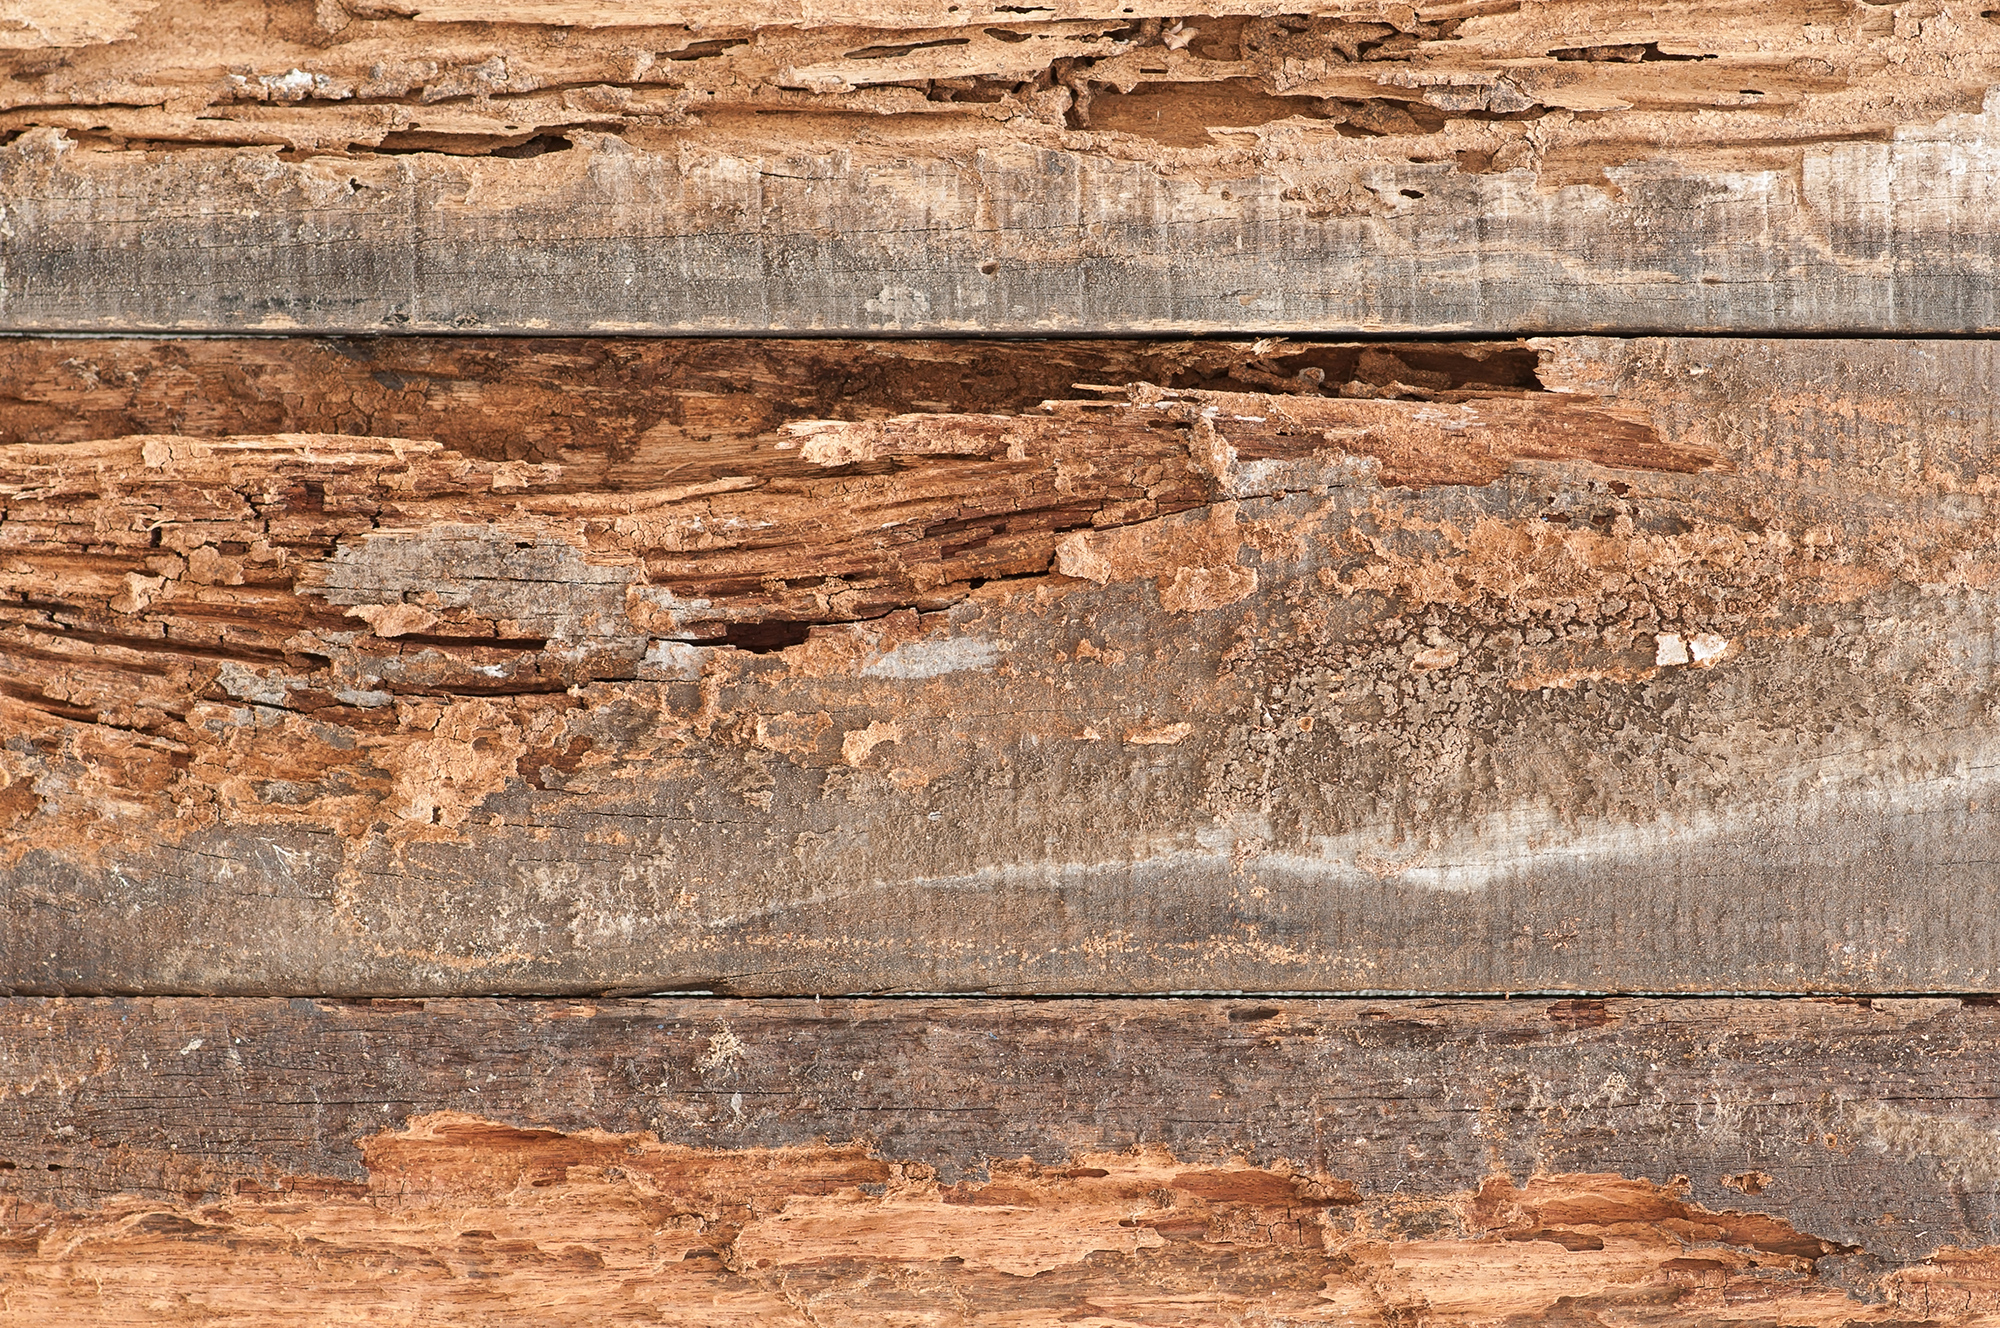 Wood planks with termite damage